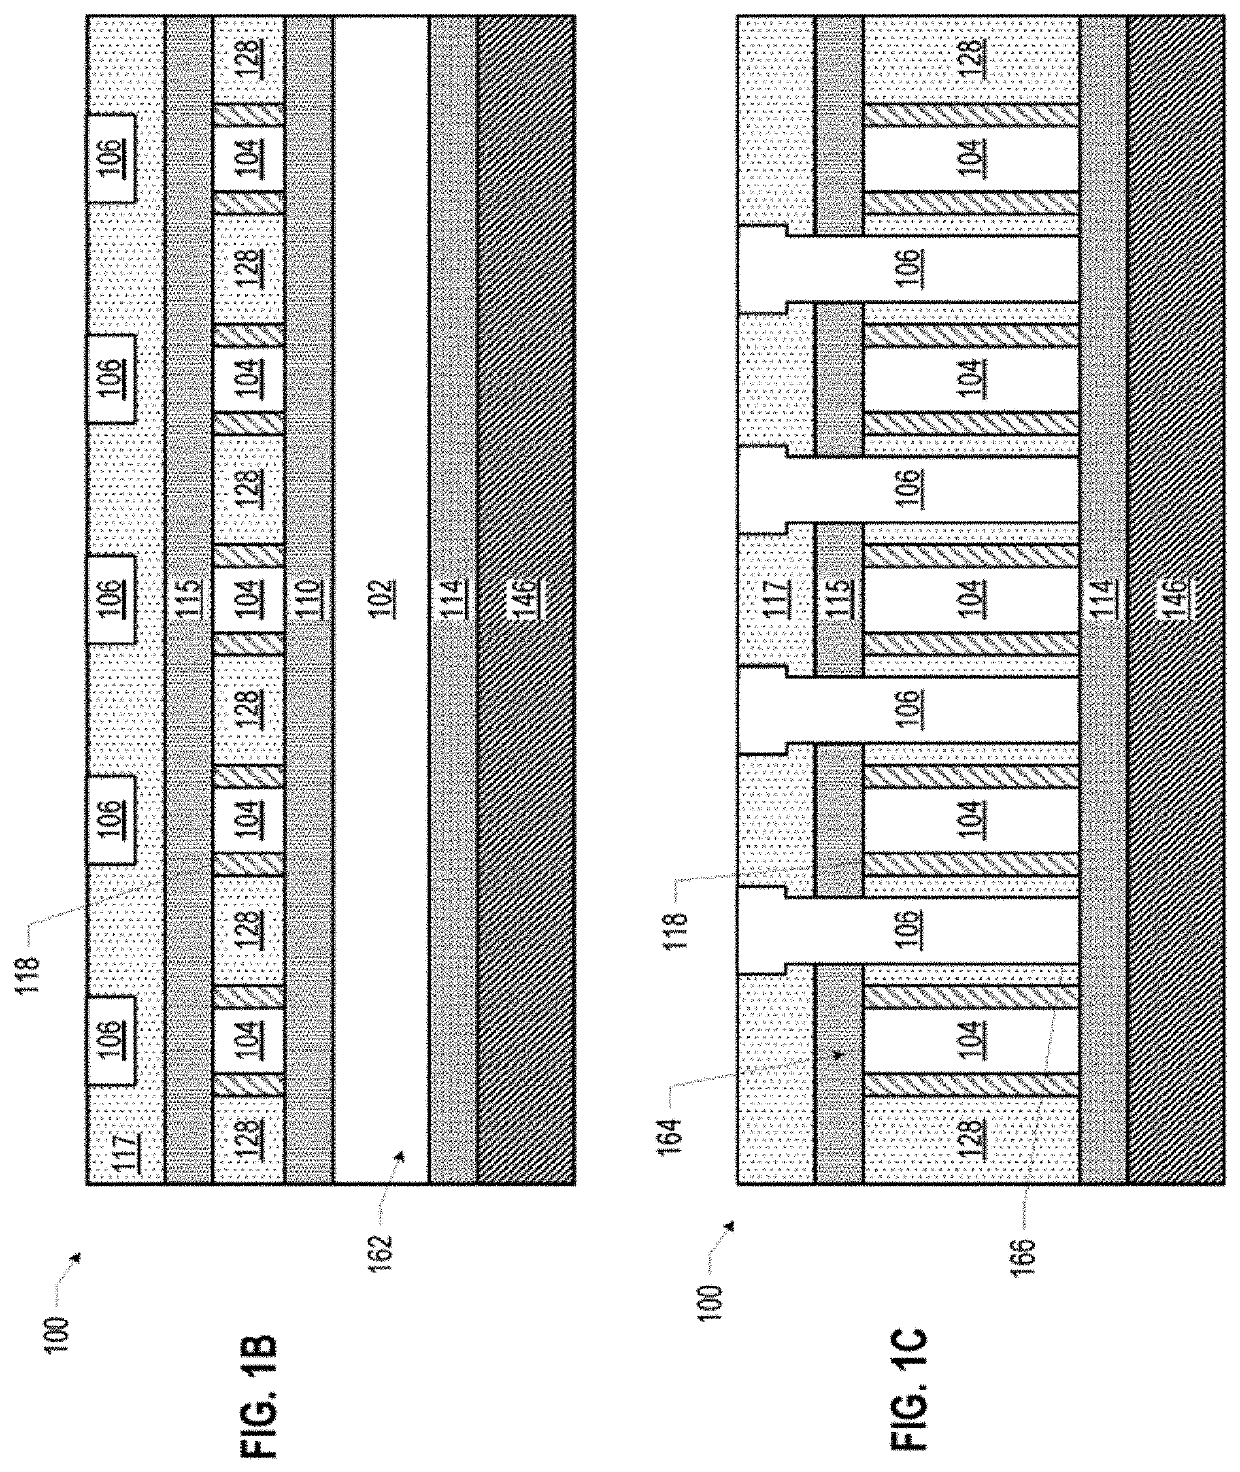 Apparatus and method for specifying quantum operation parallelism for a quantum control processor